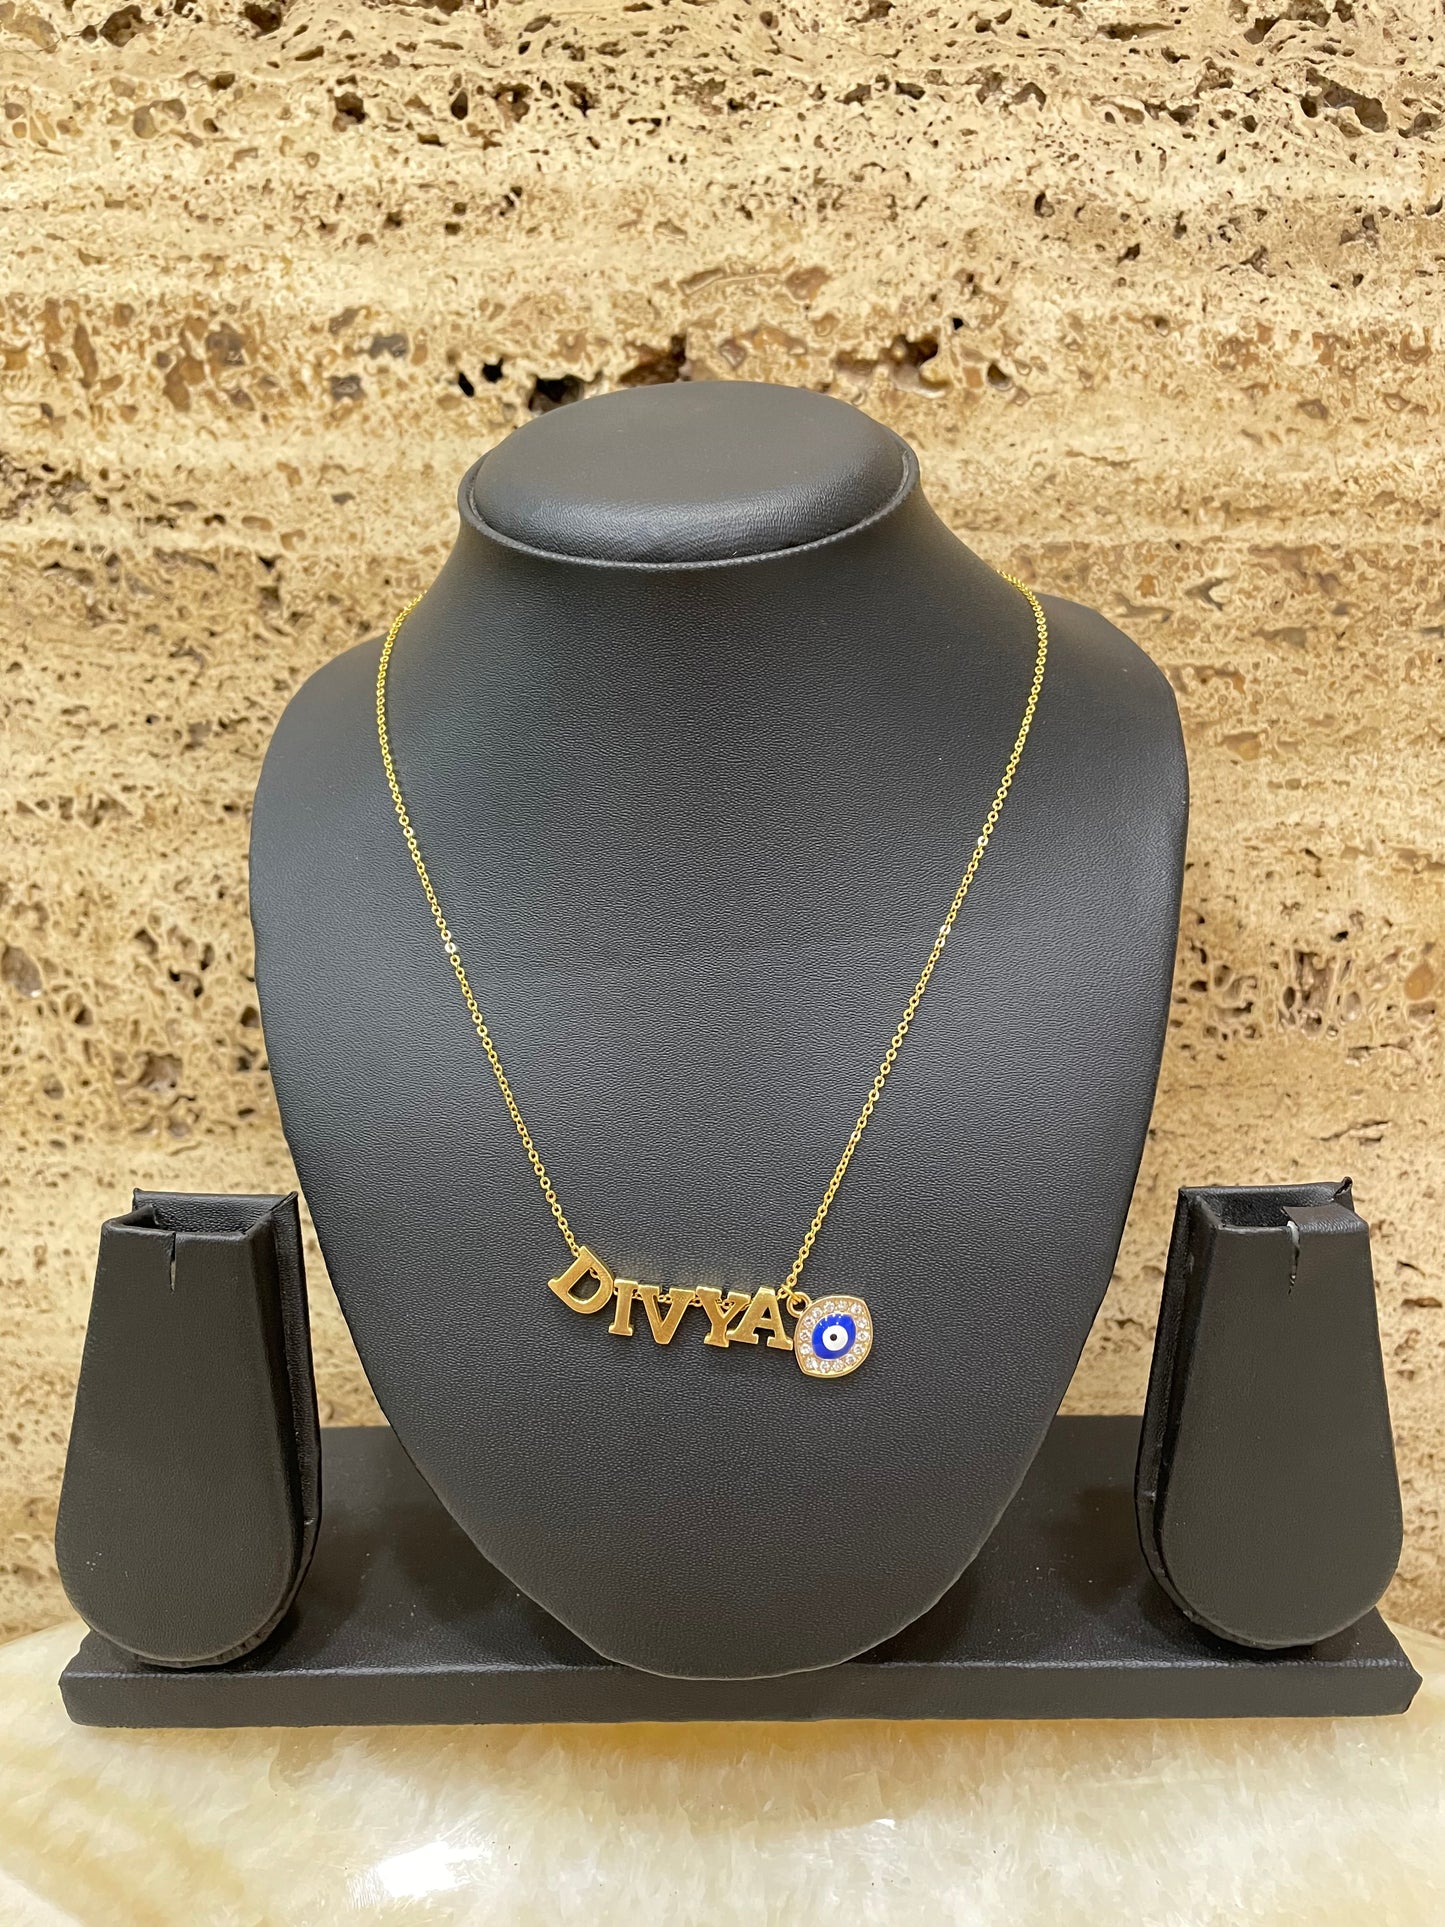 Name Necklace with American Diamond Evil Eye